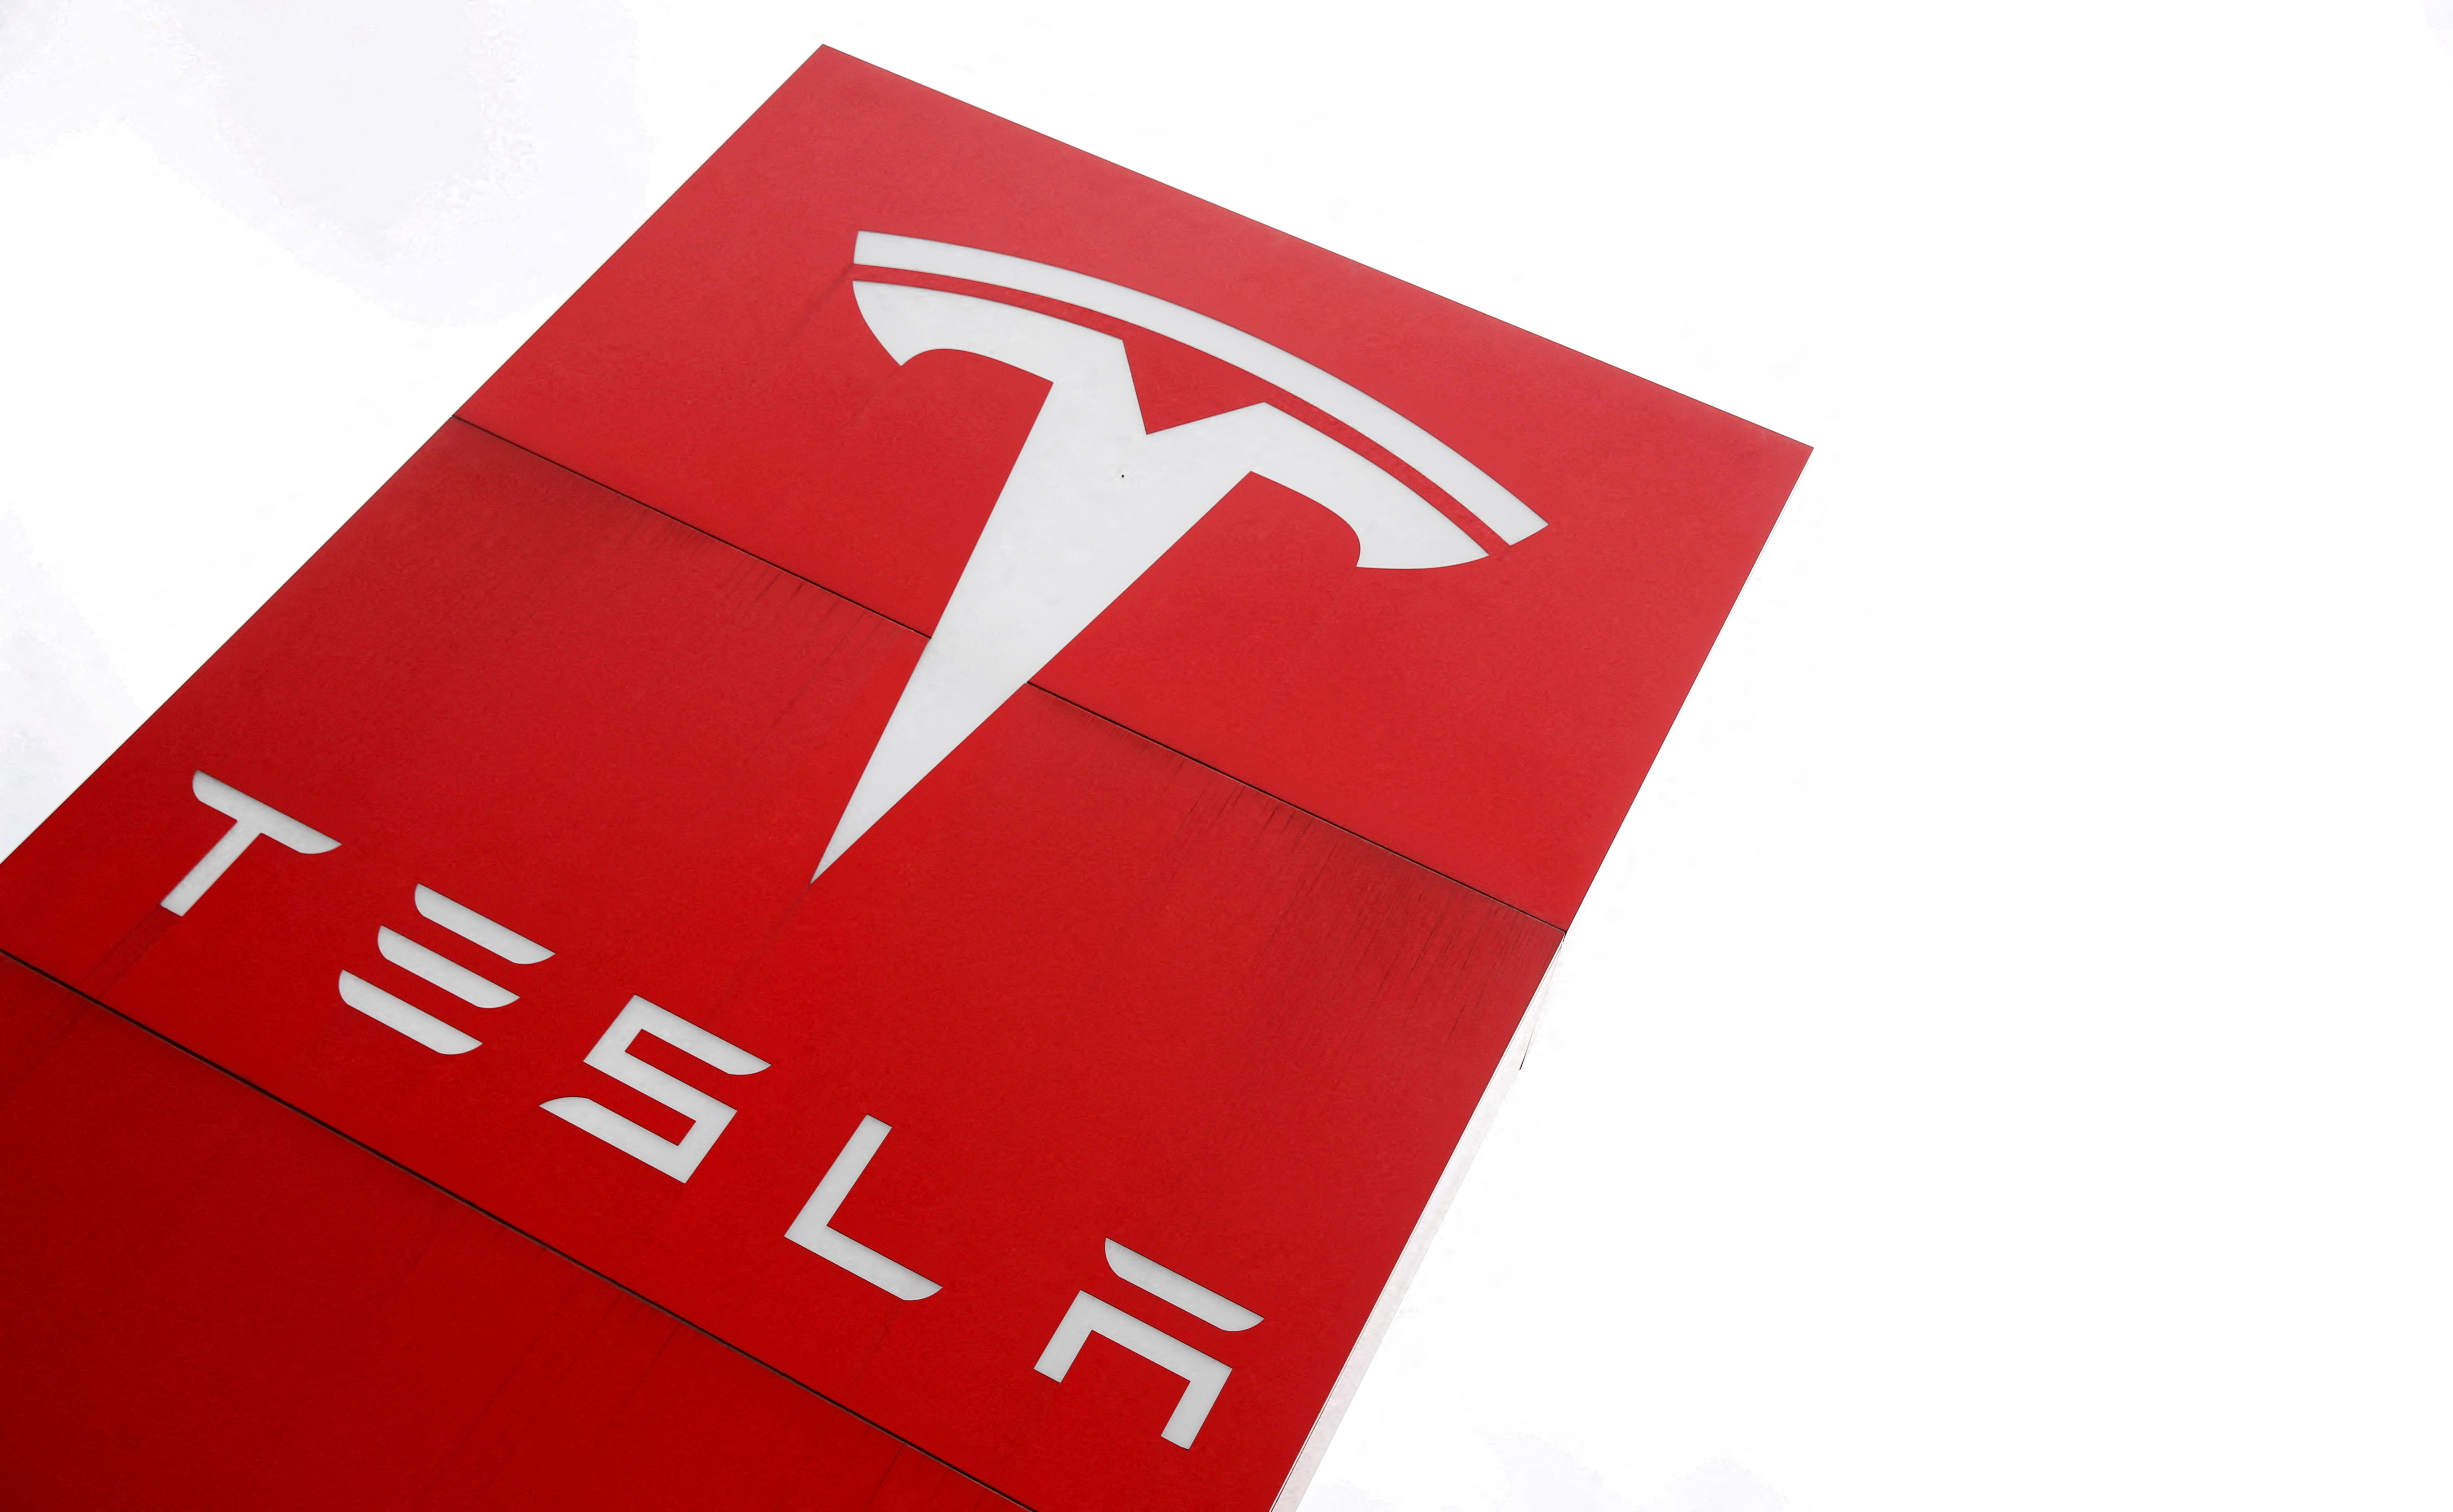 The logo of car manufacturer Tesla is seen at a dealership in London, Britain, May 14, 2021. REUTERS/Matthew Childs/File Photo